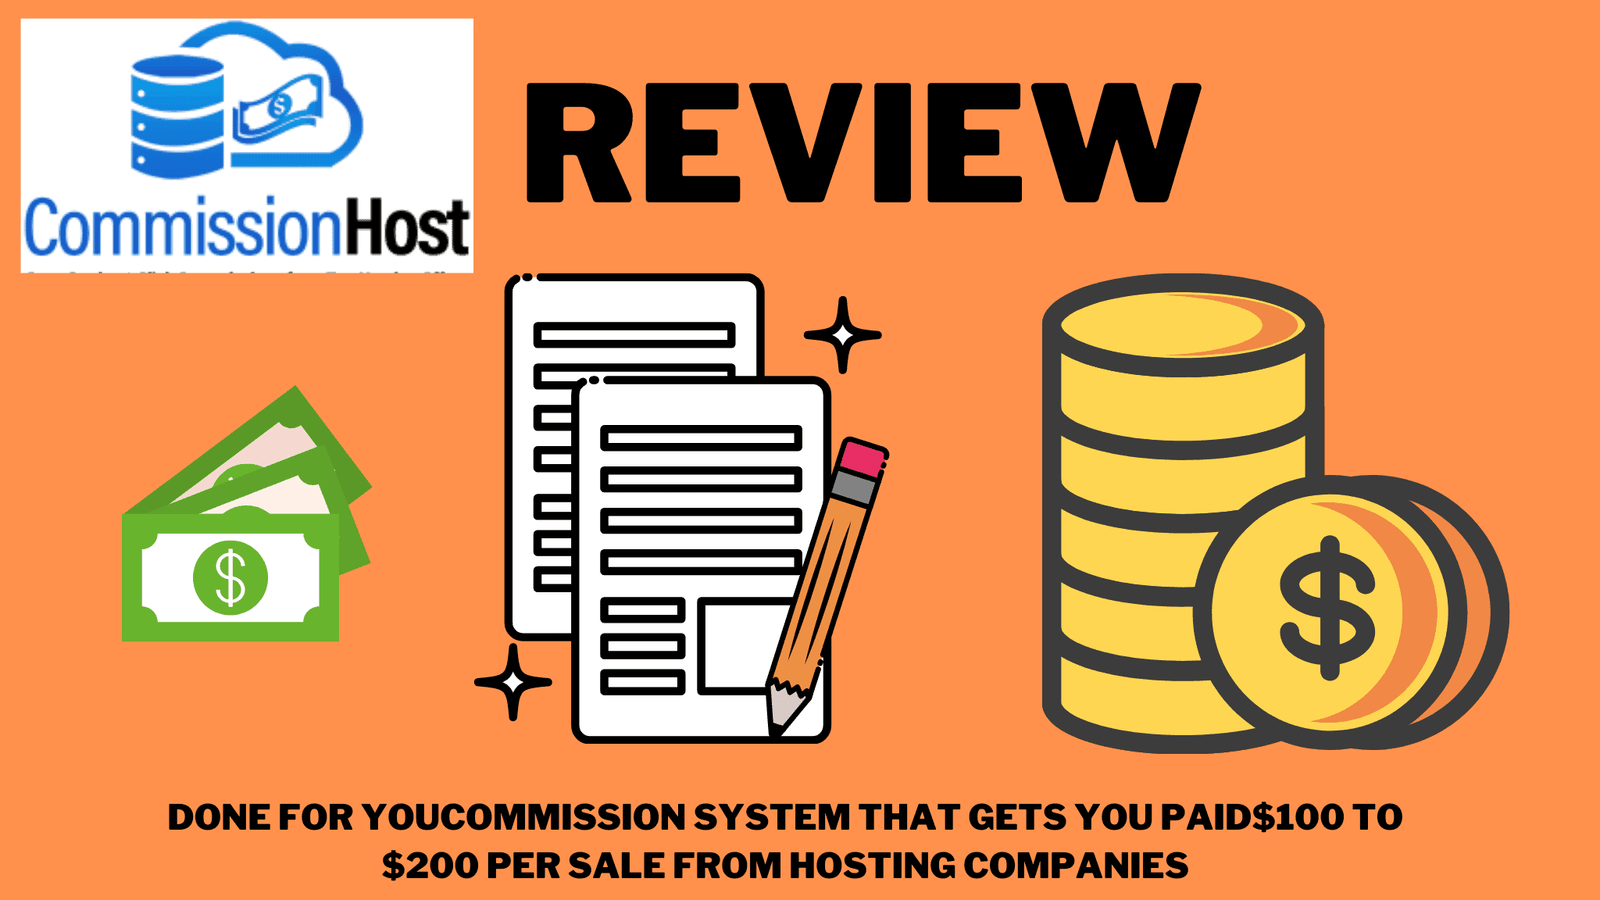 Commission Host Review